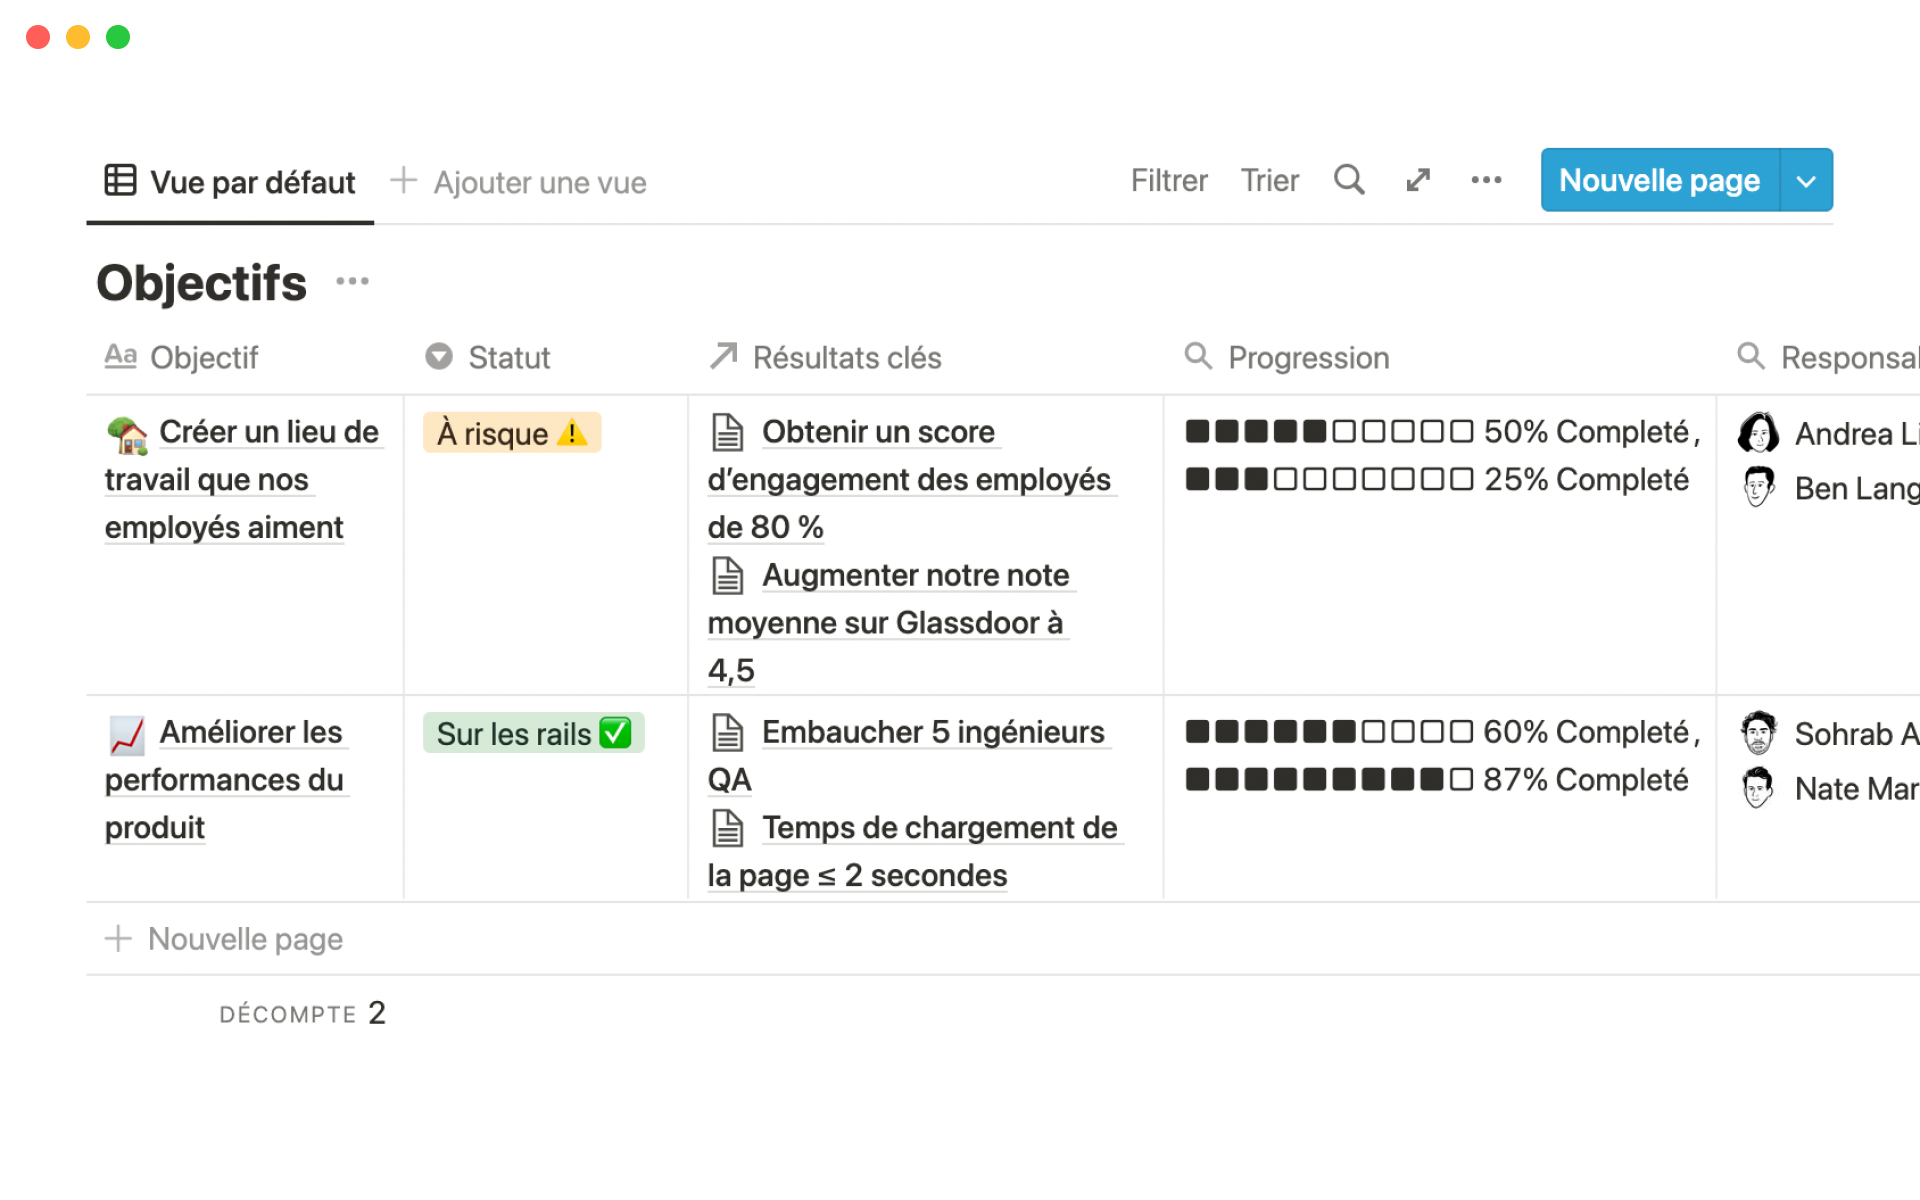 Build an efficient, organized OKR tracker with Notion